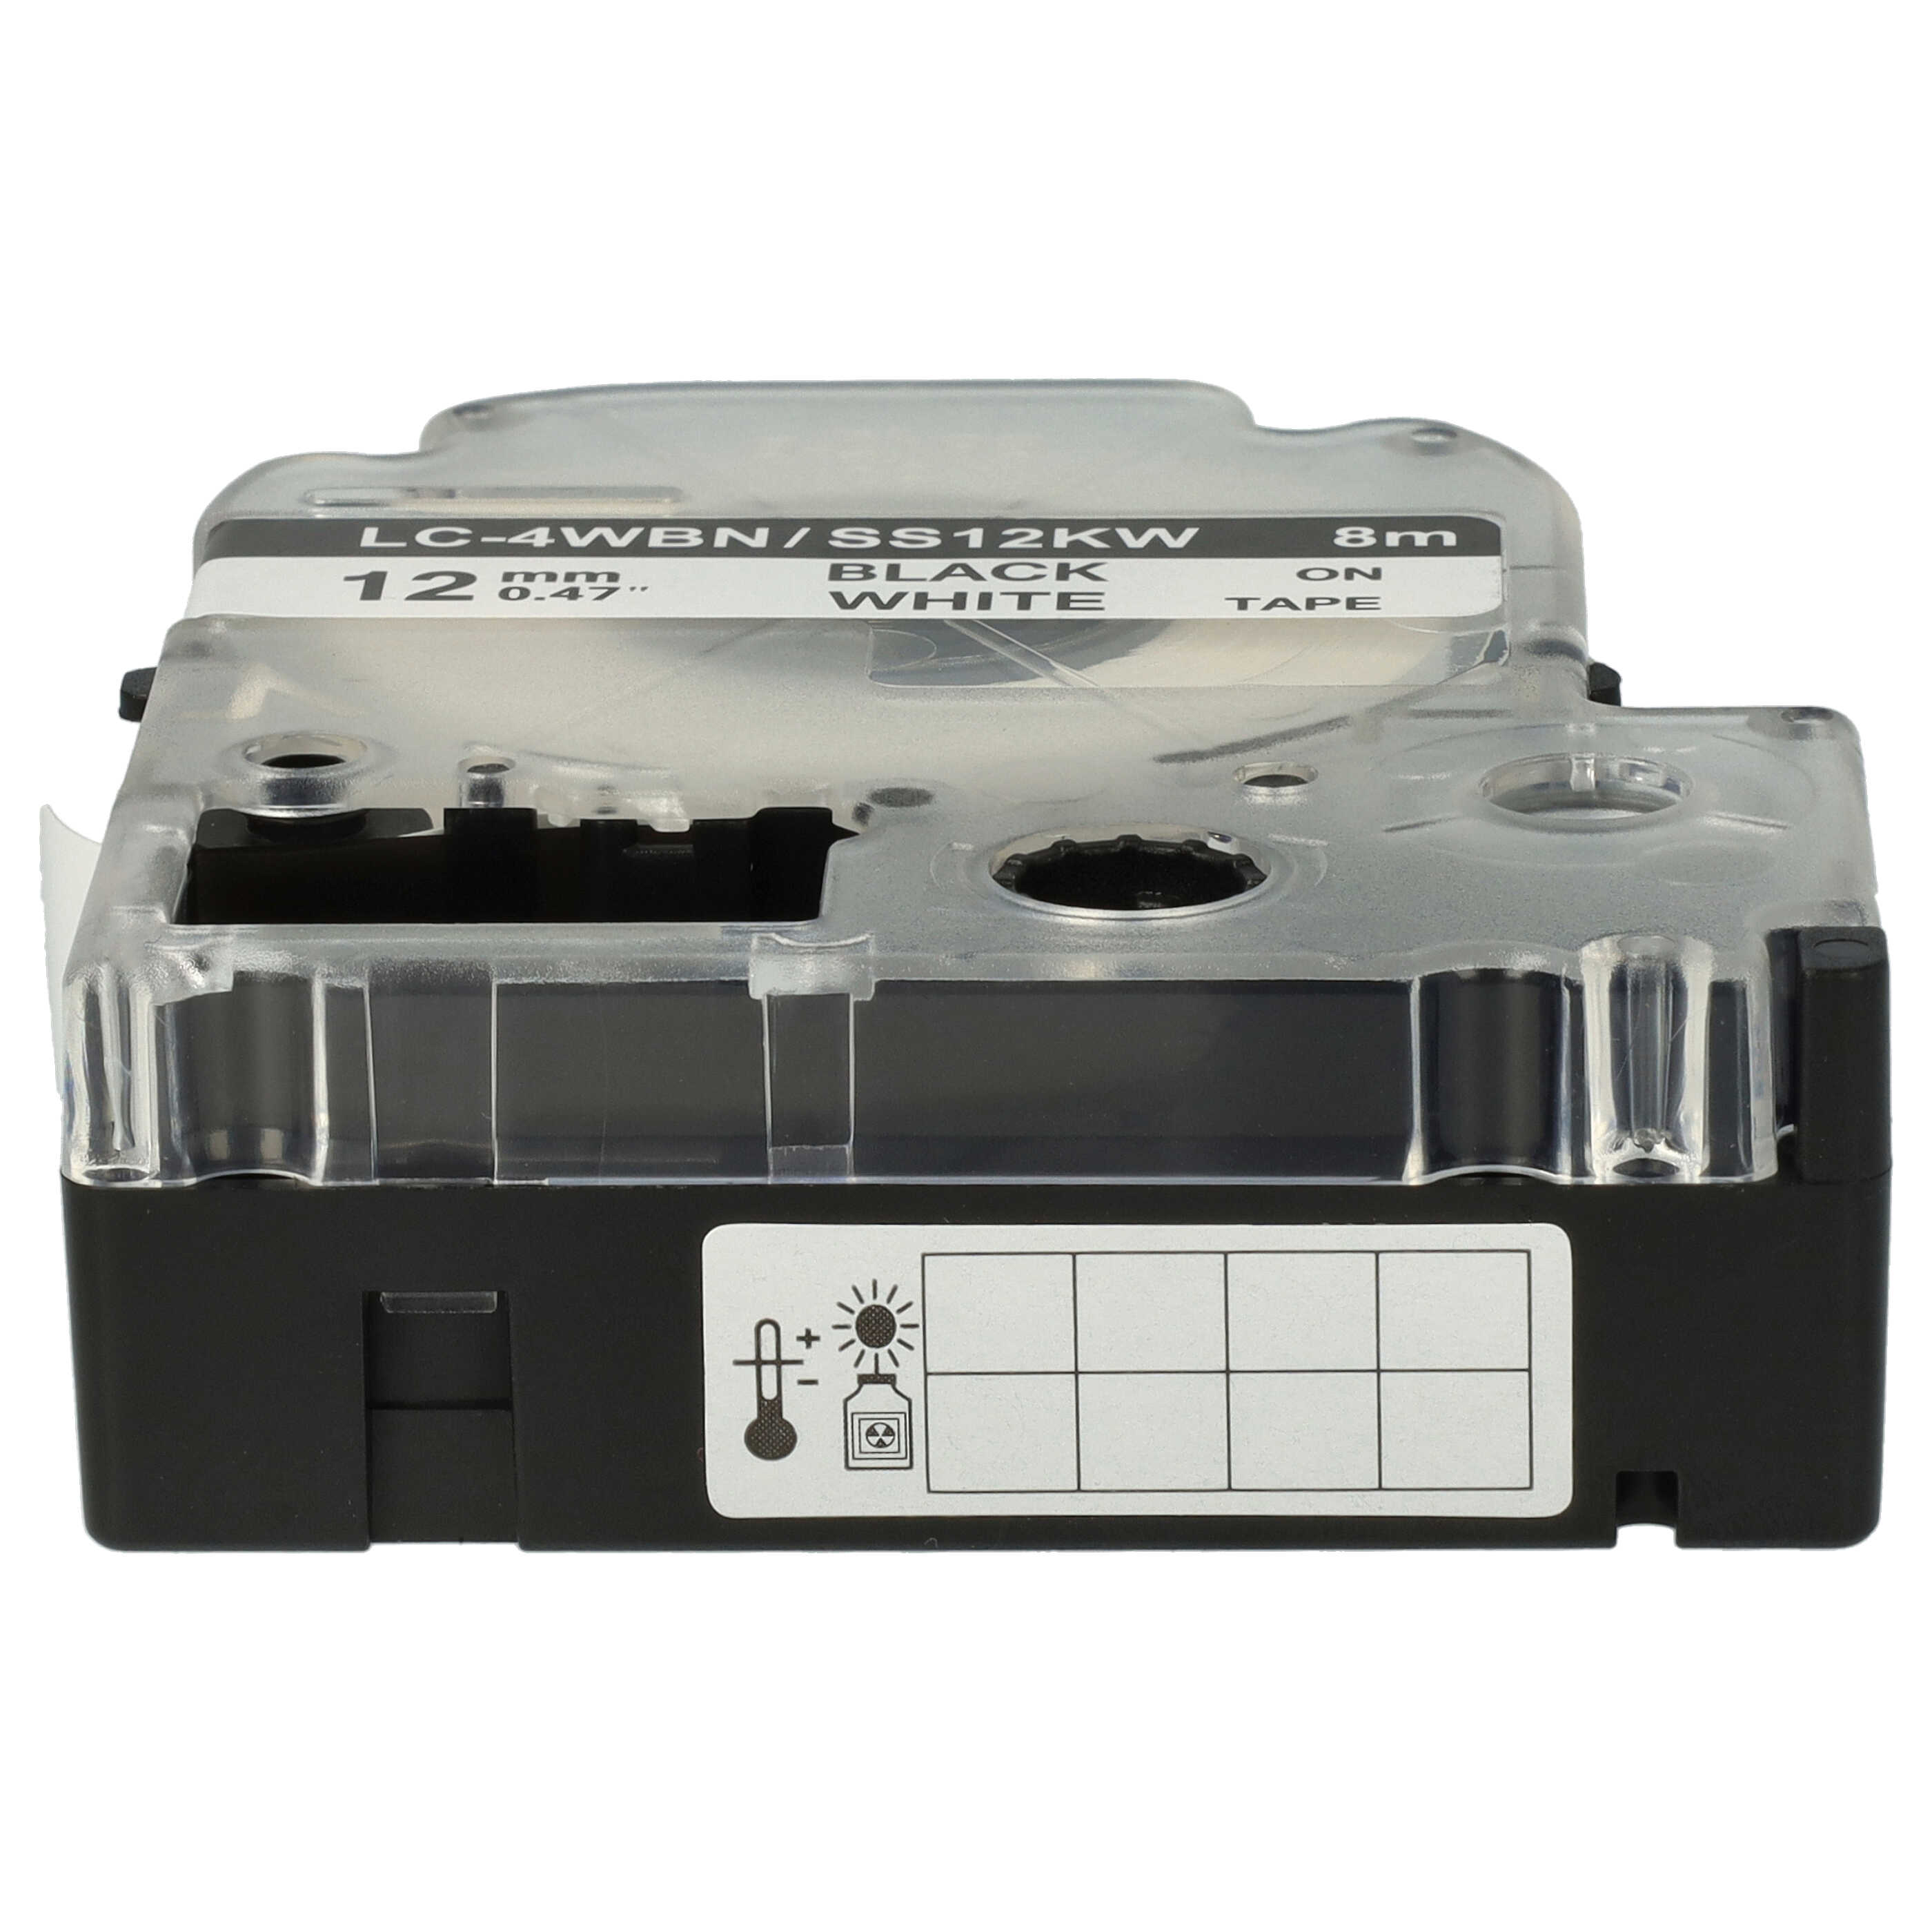 3x Label Tape as Replacement for Epson SS12KW, LC-4WBN - 12 mm Black to White